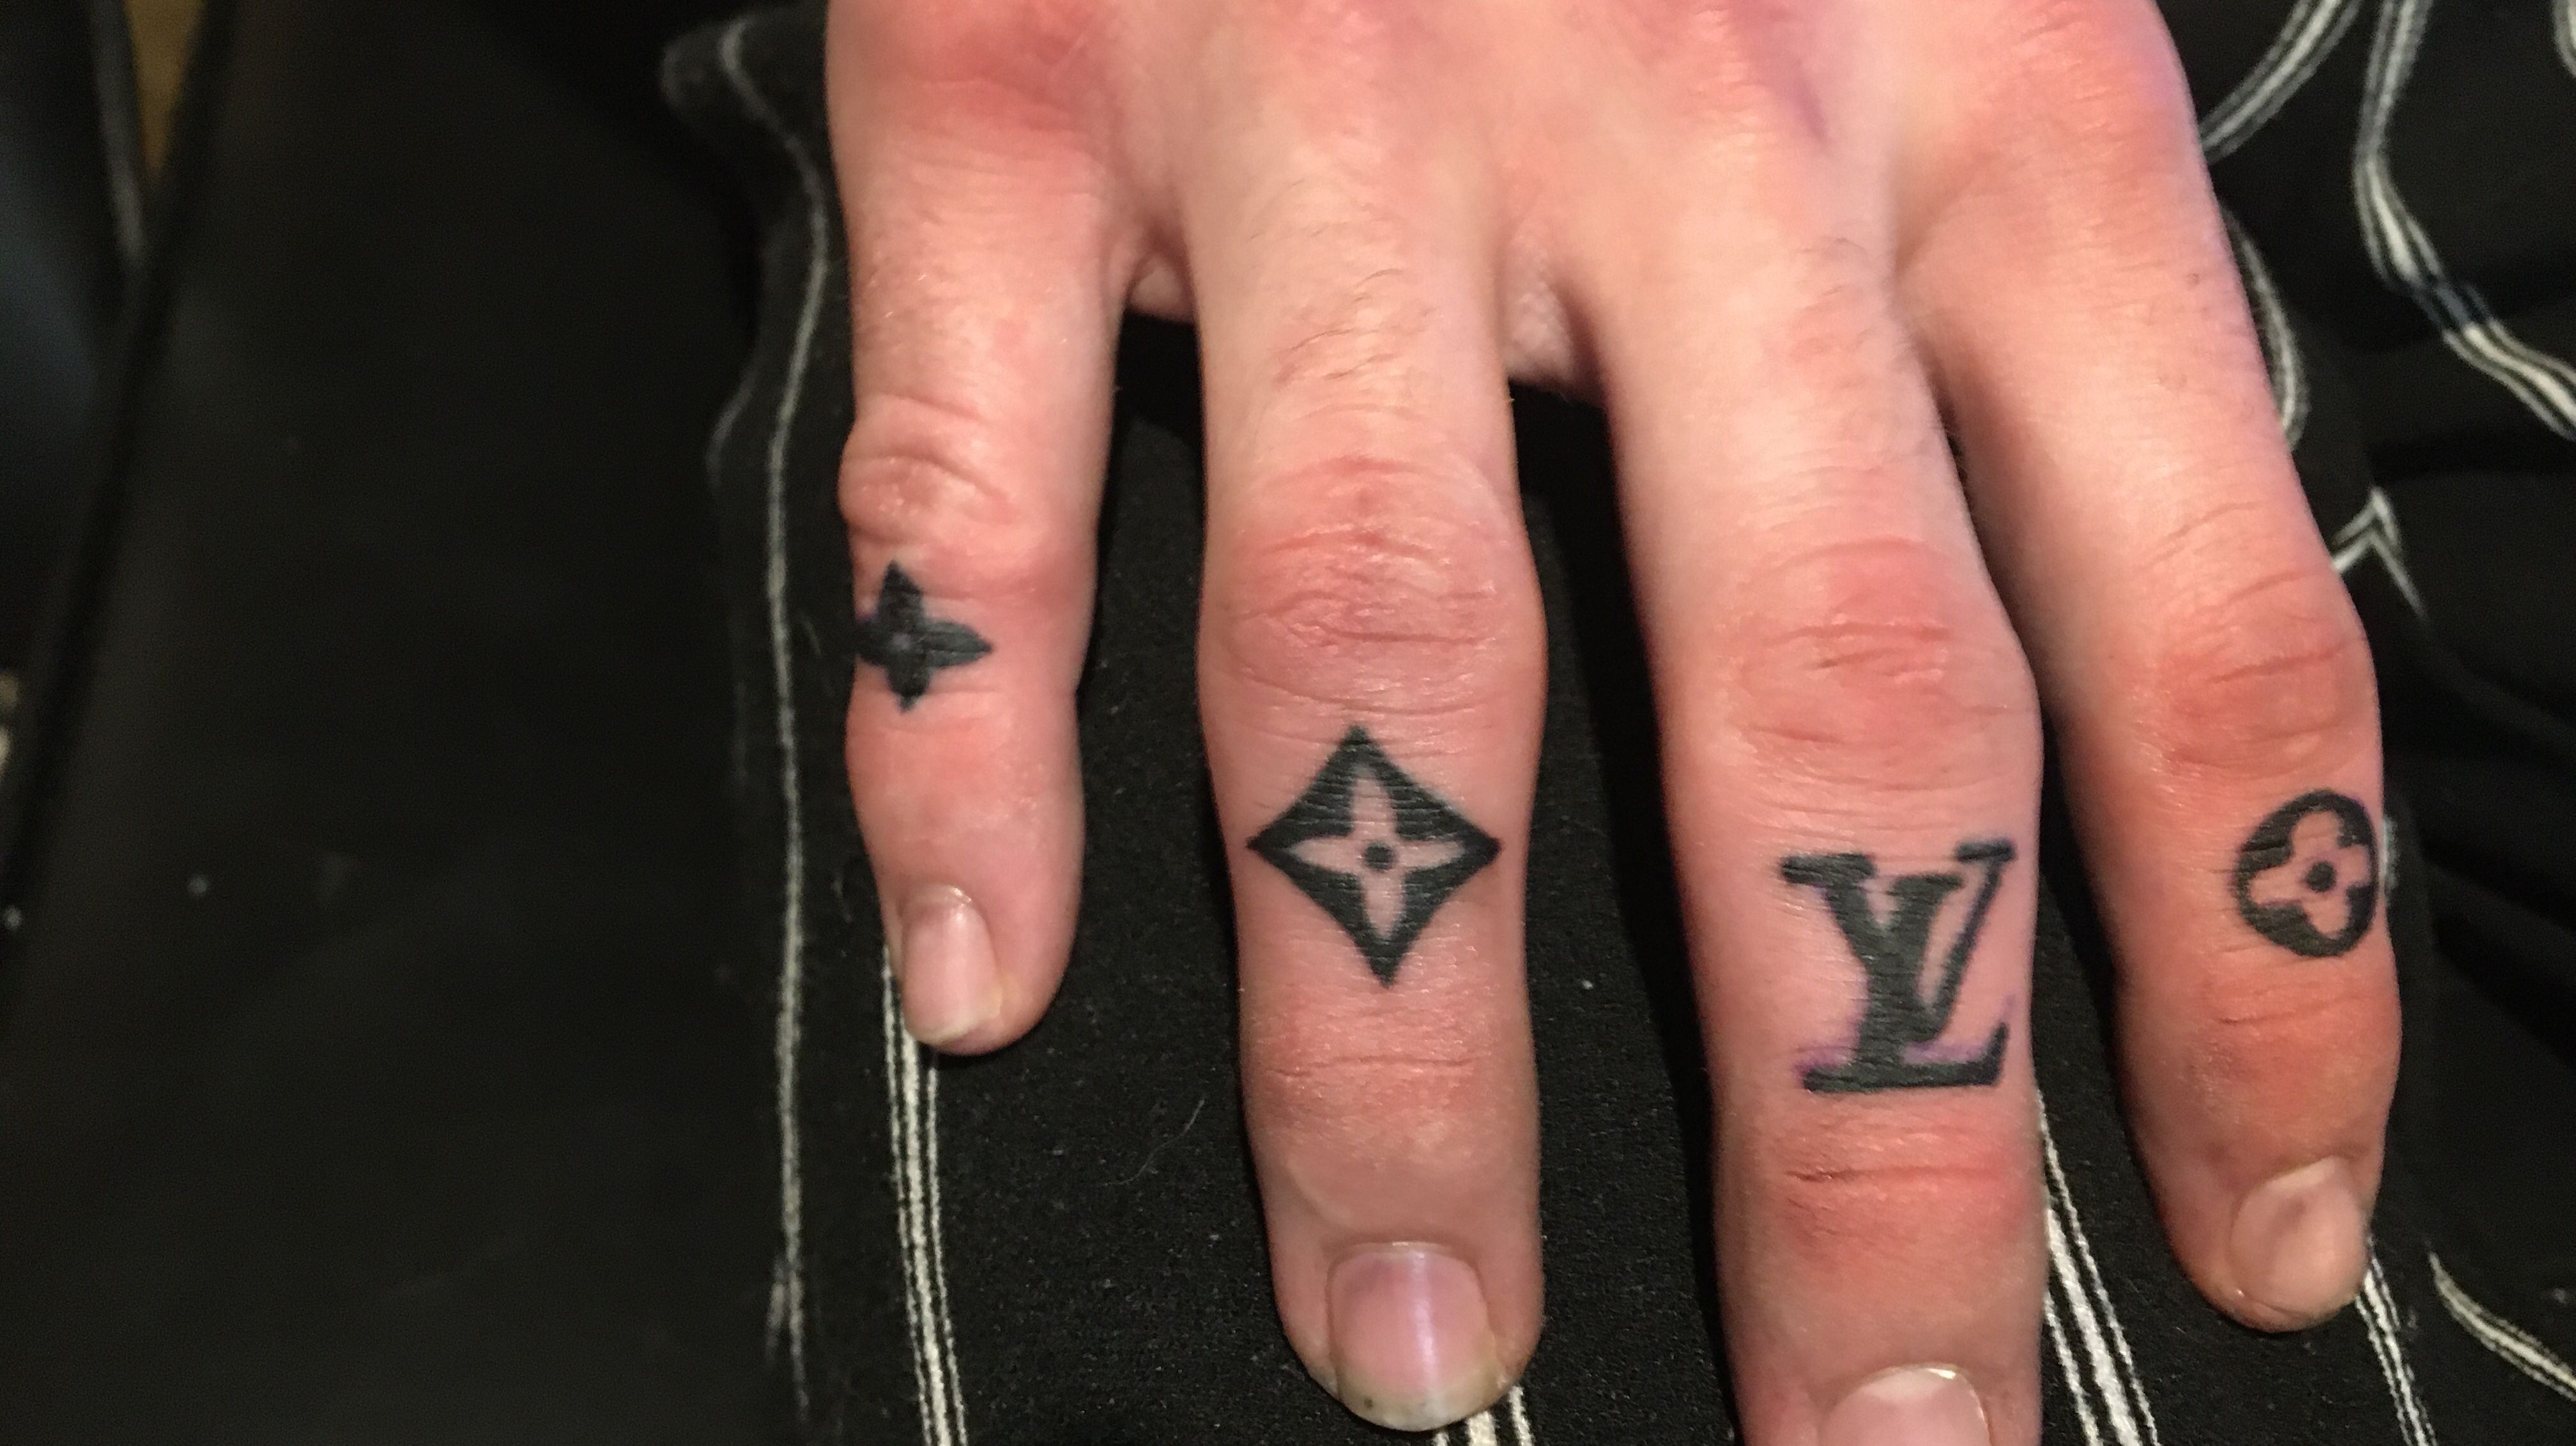 finger tattoo, louis vuitton and girl - image #7950774 on